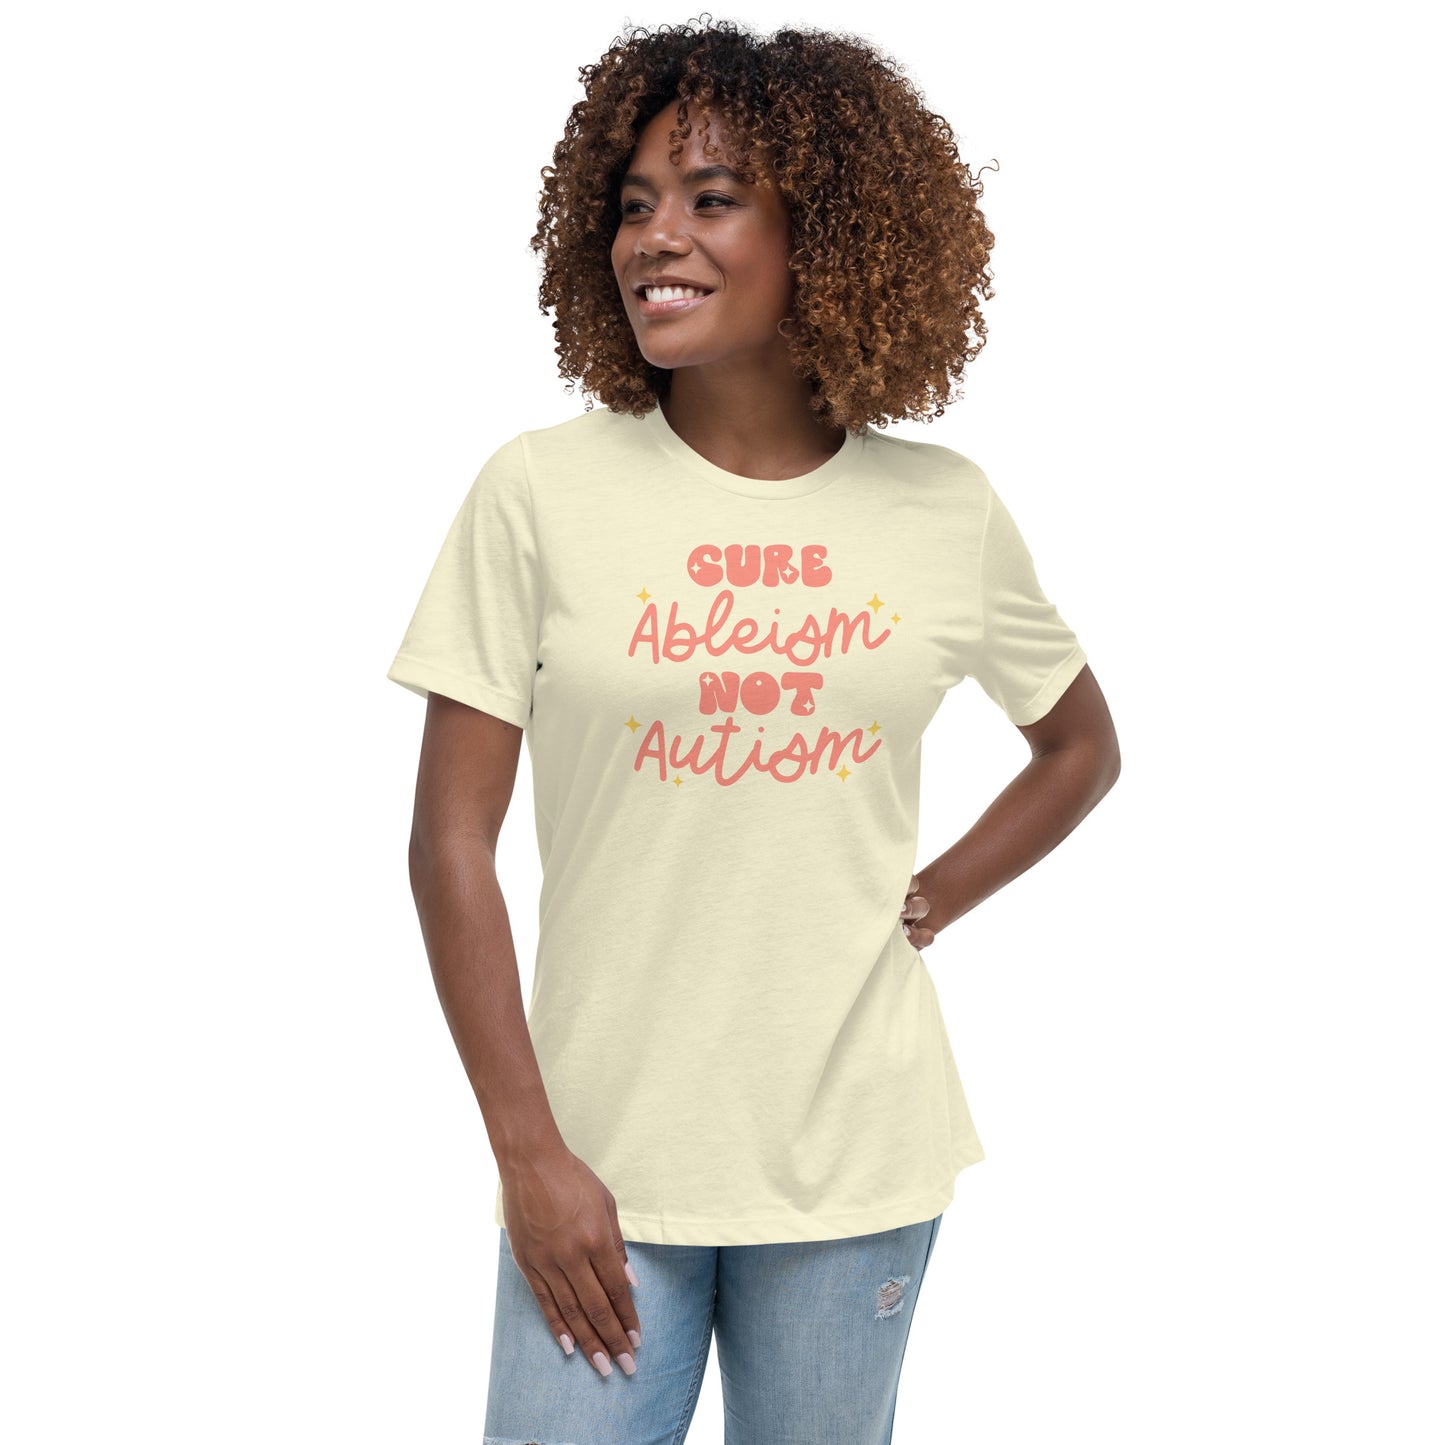 Cure Ableism Not Autism [Women’s T-shirt]